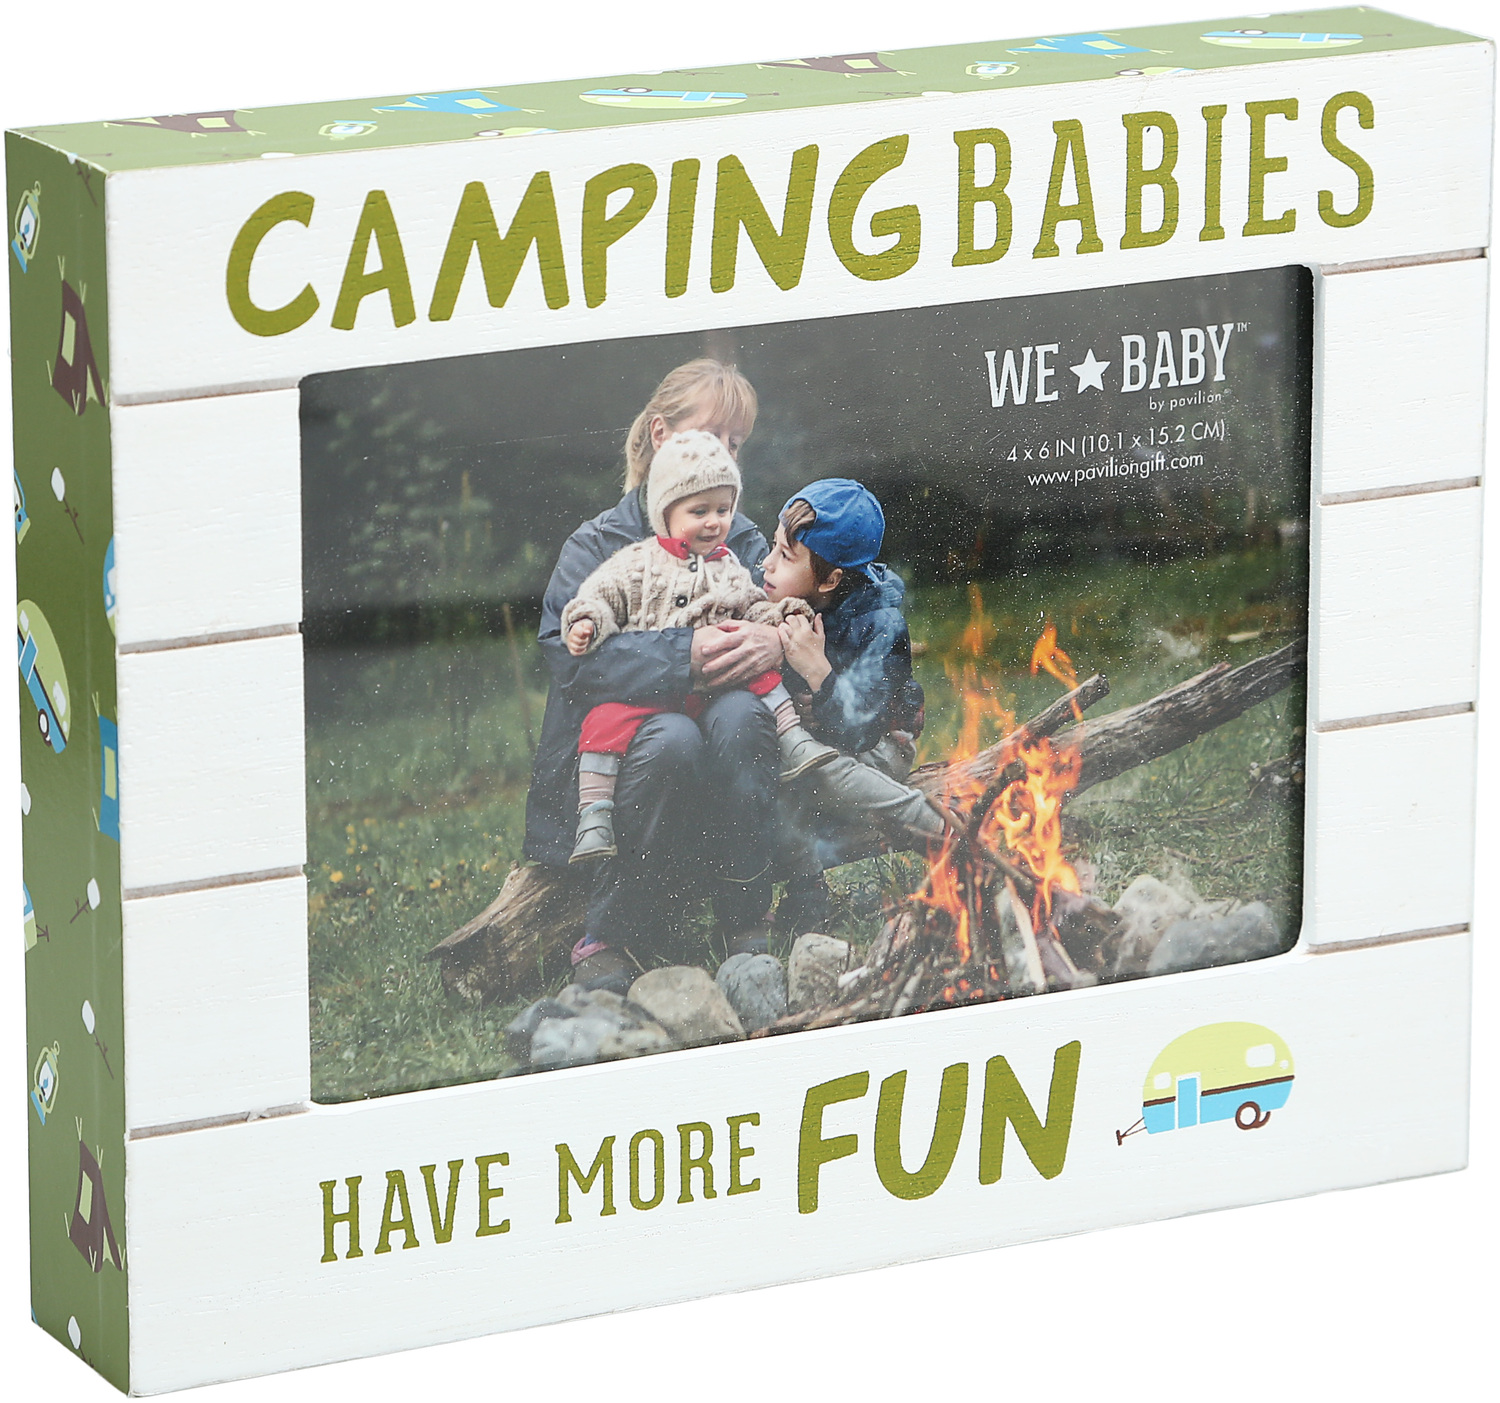 Camping Babies by We Baby - Camping Babies - 7.5" x 6" Frame
(Holds 6" x 4" Photo)